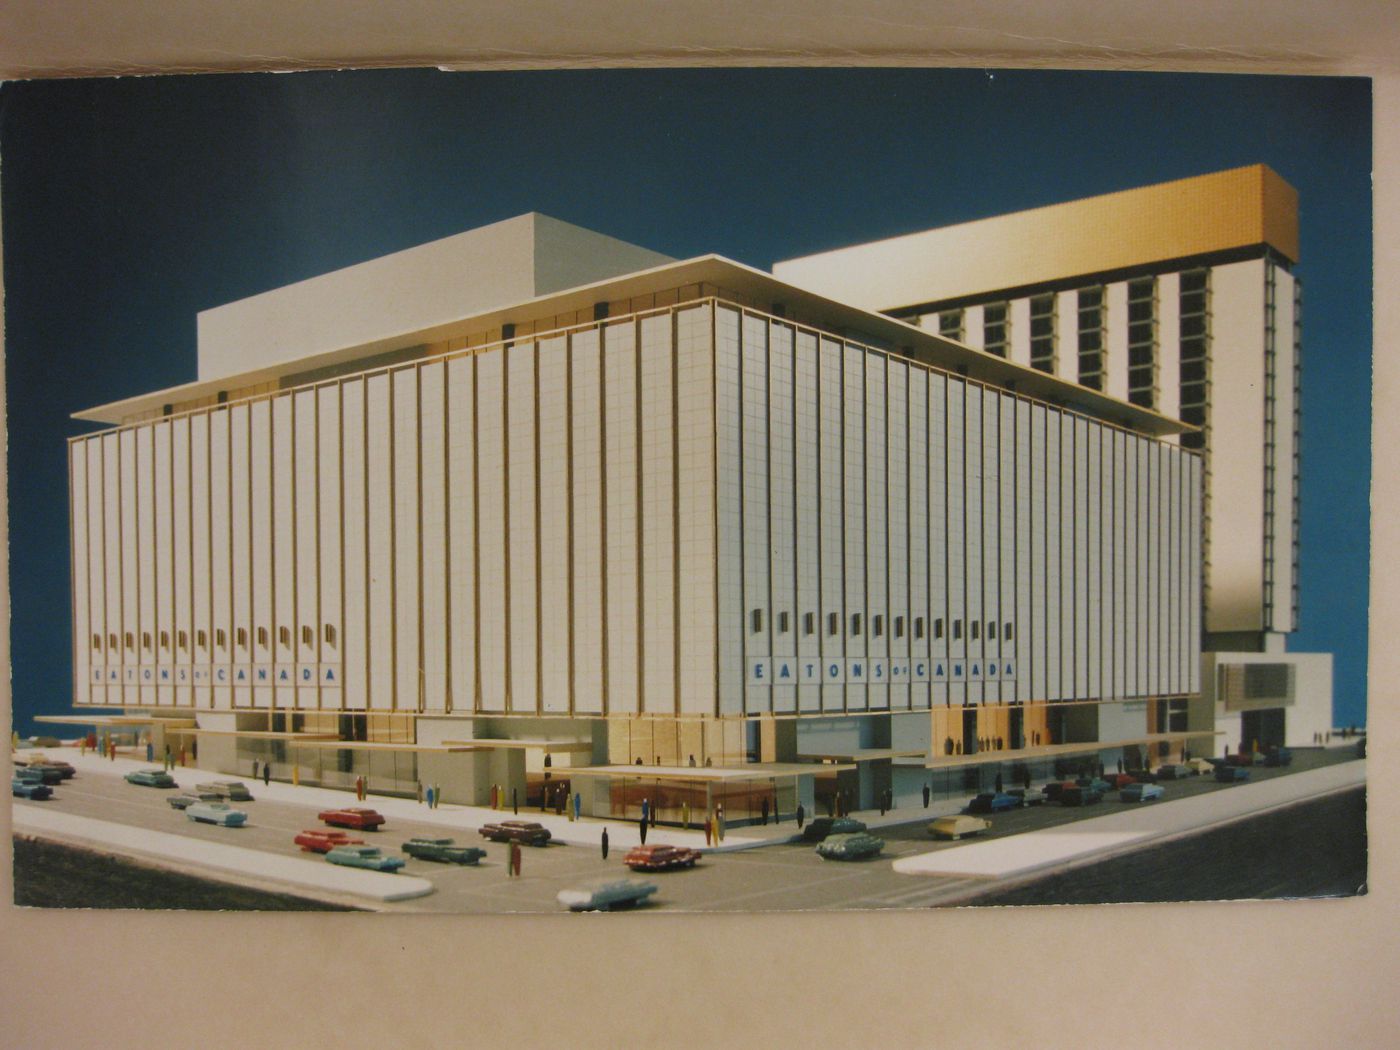 View of a model for the Eaton's Department Store and Office Tower